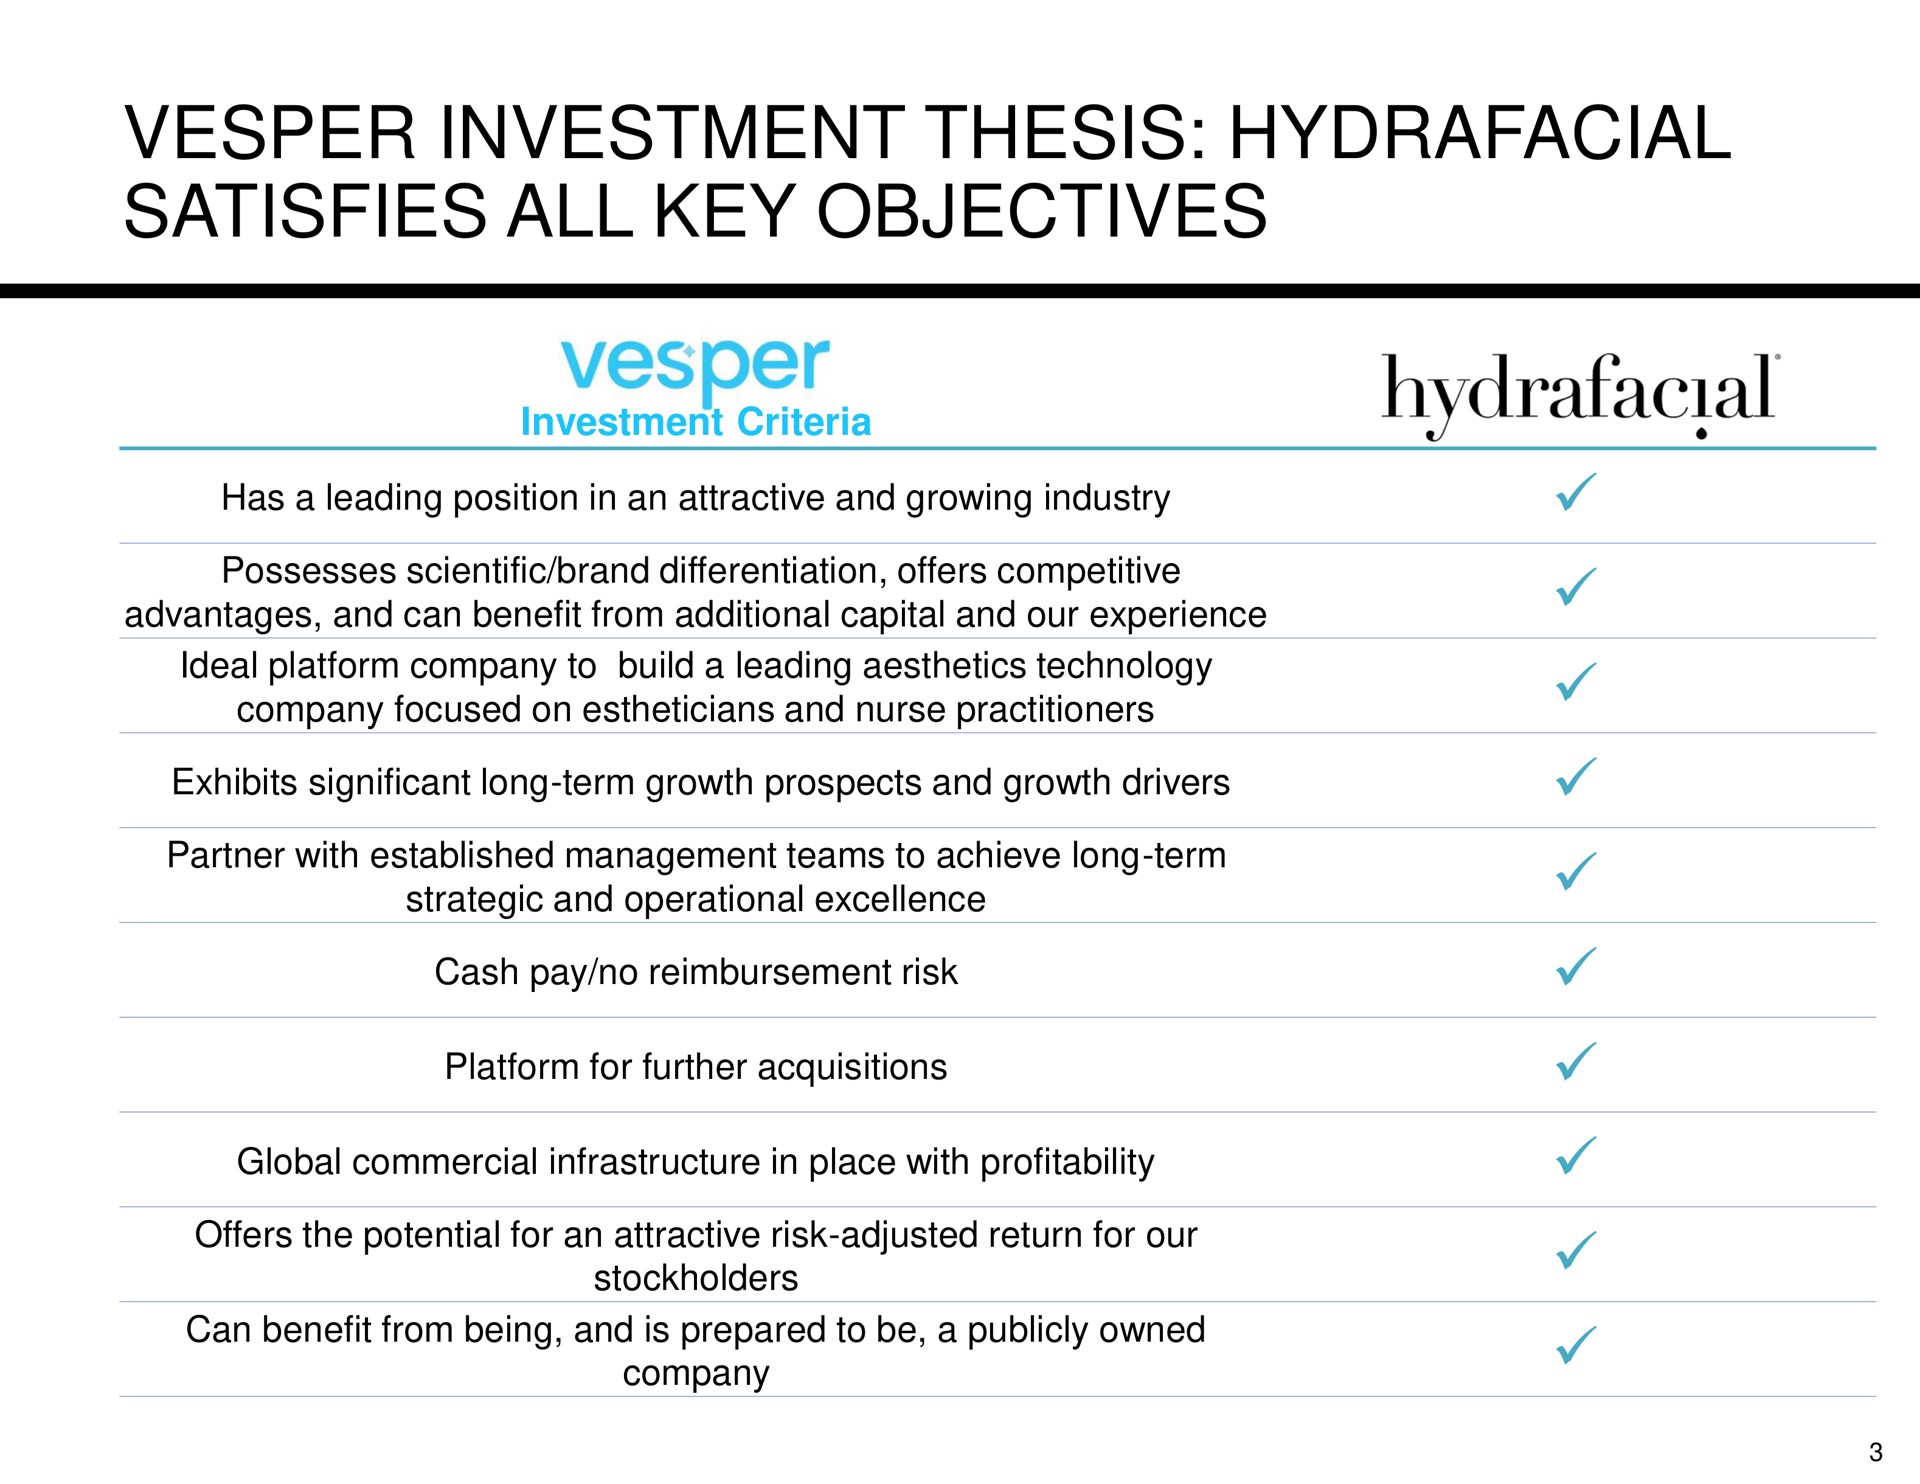 vesper investment thesis satisfies all key objectives | Hydrafacial